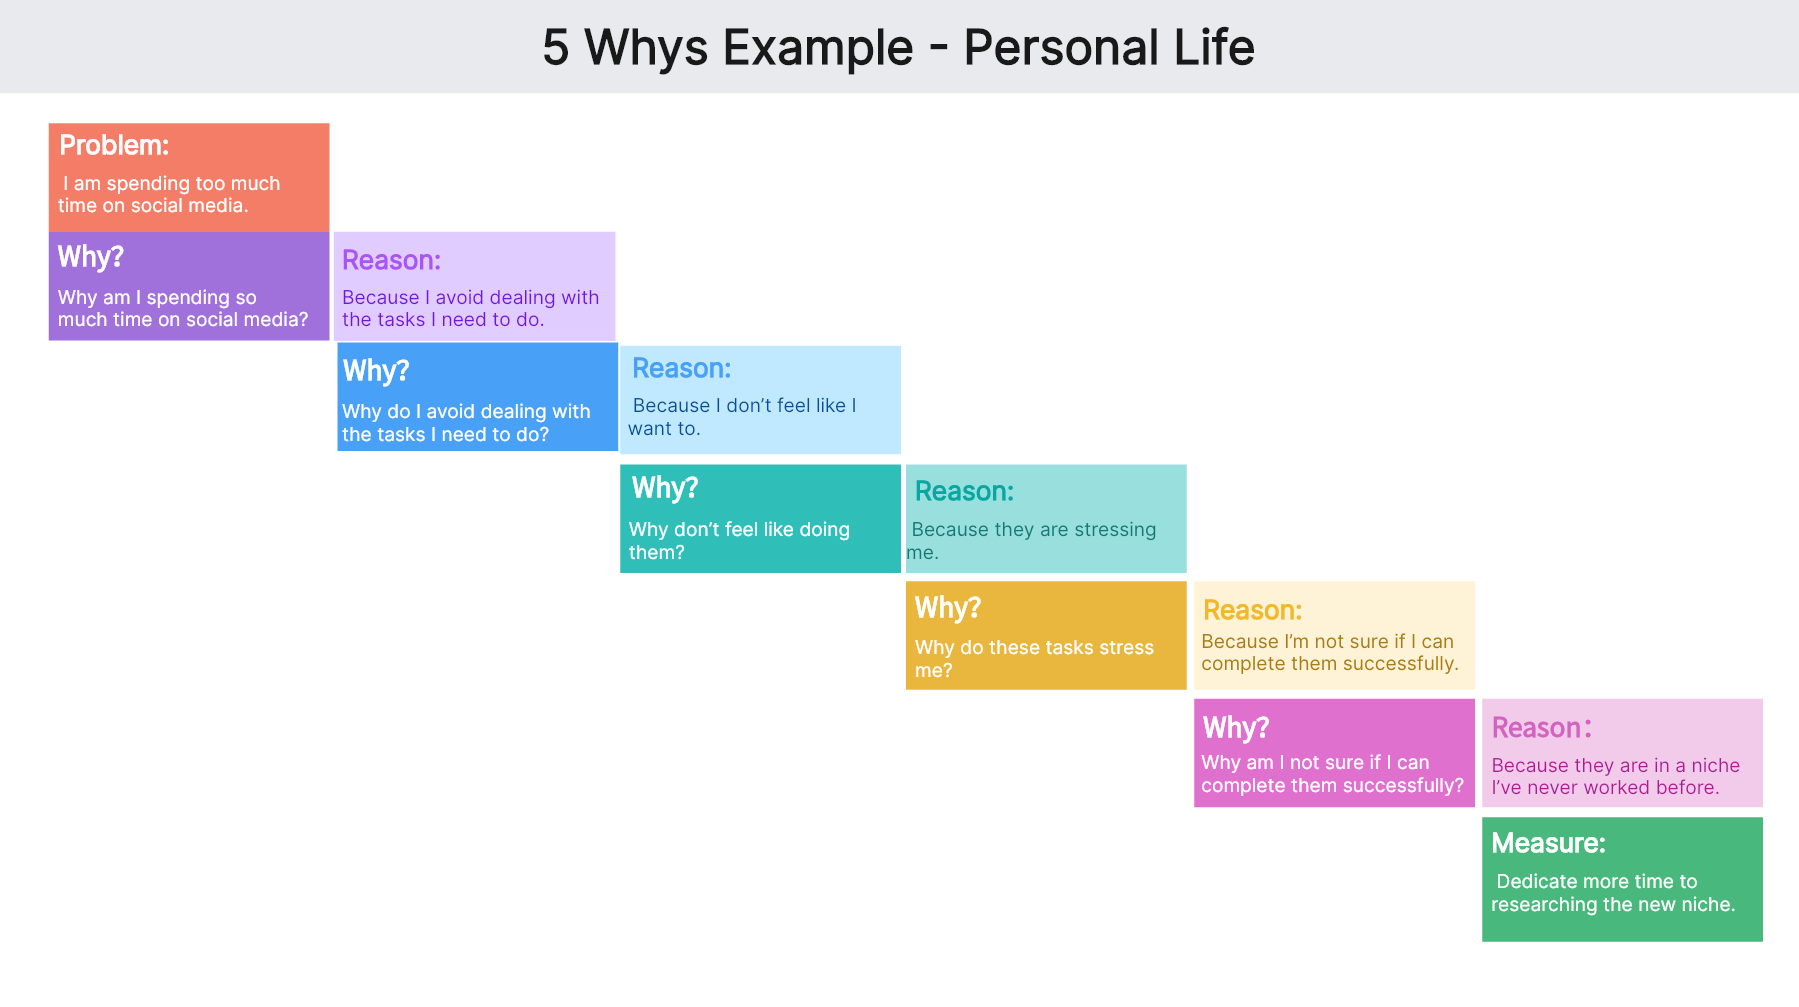 5 whys example personal life